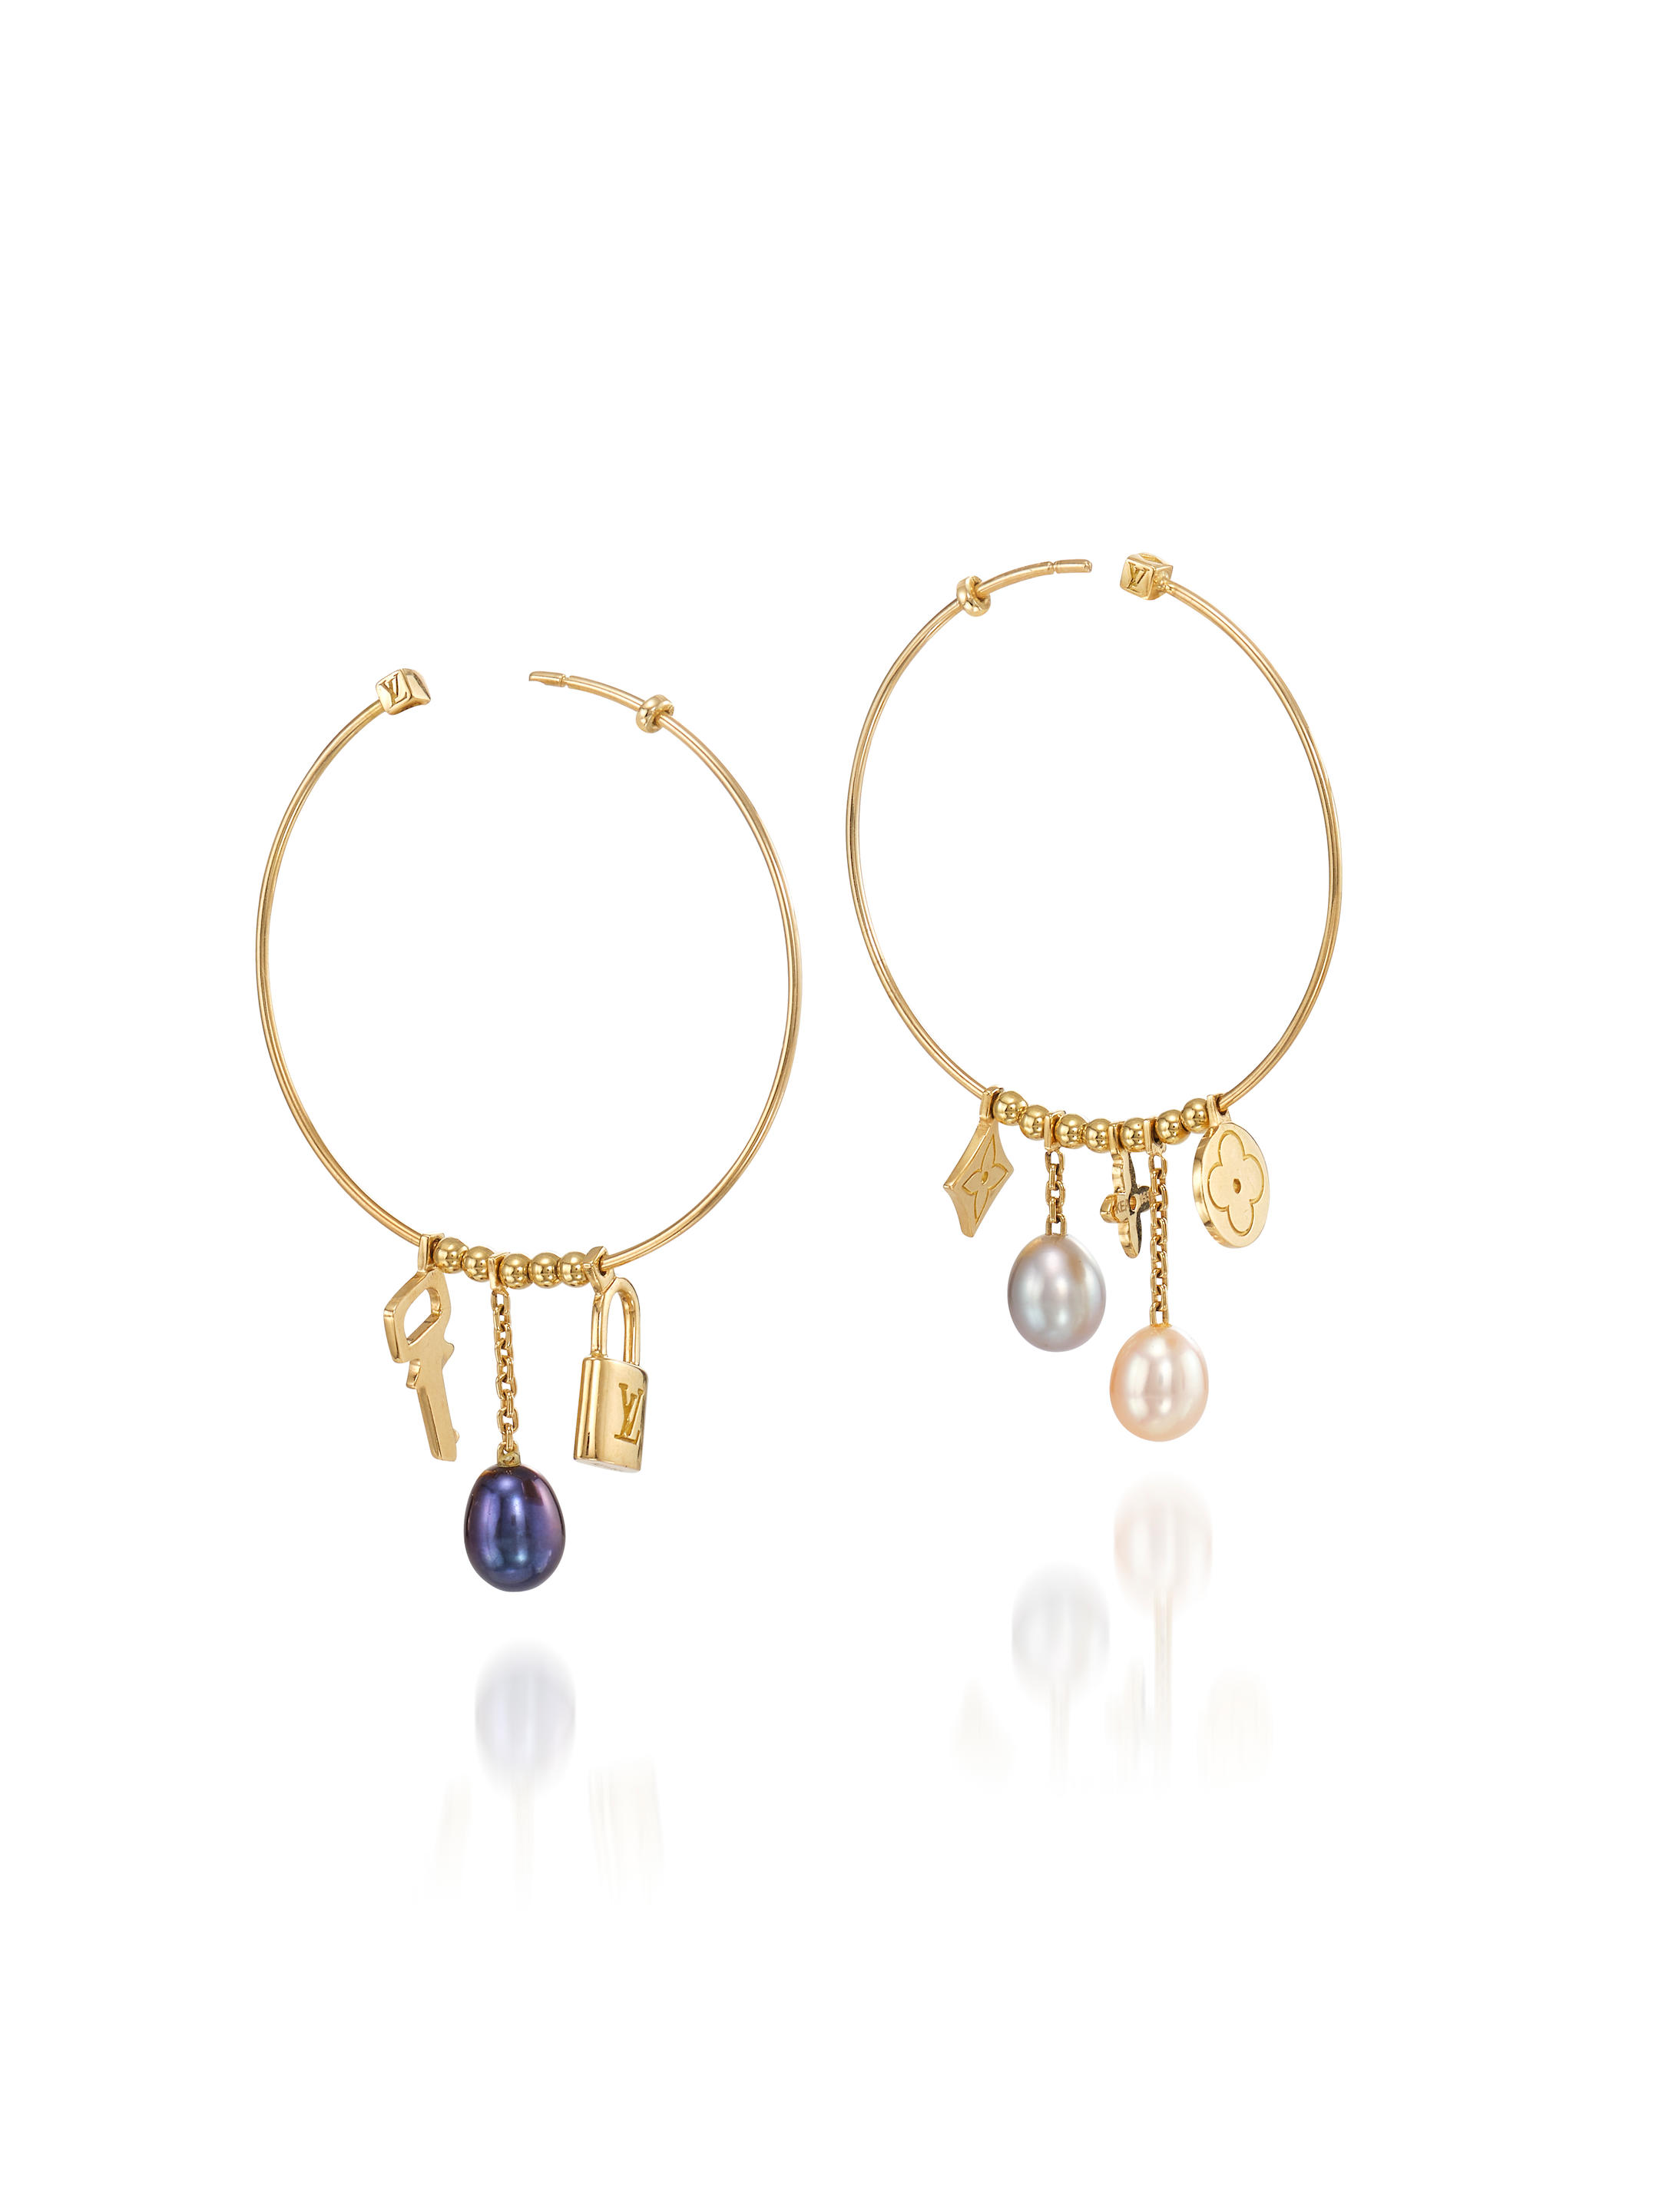 Louis Vuitton Gold, Cultured Pearl And Charm Hoop Earrings